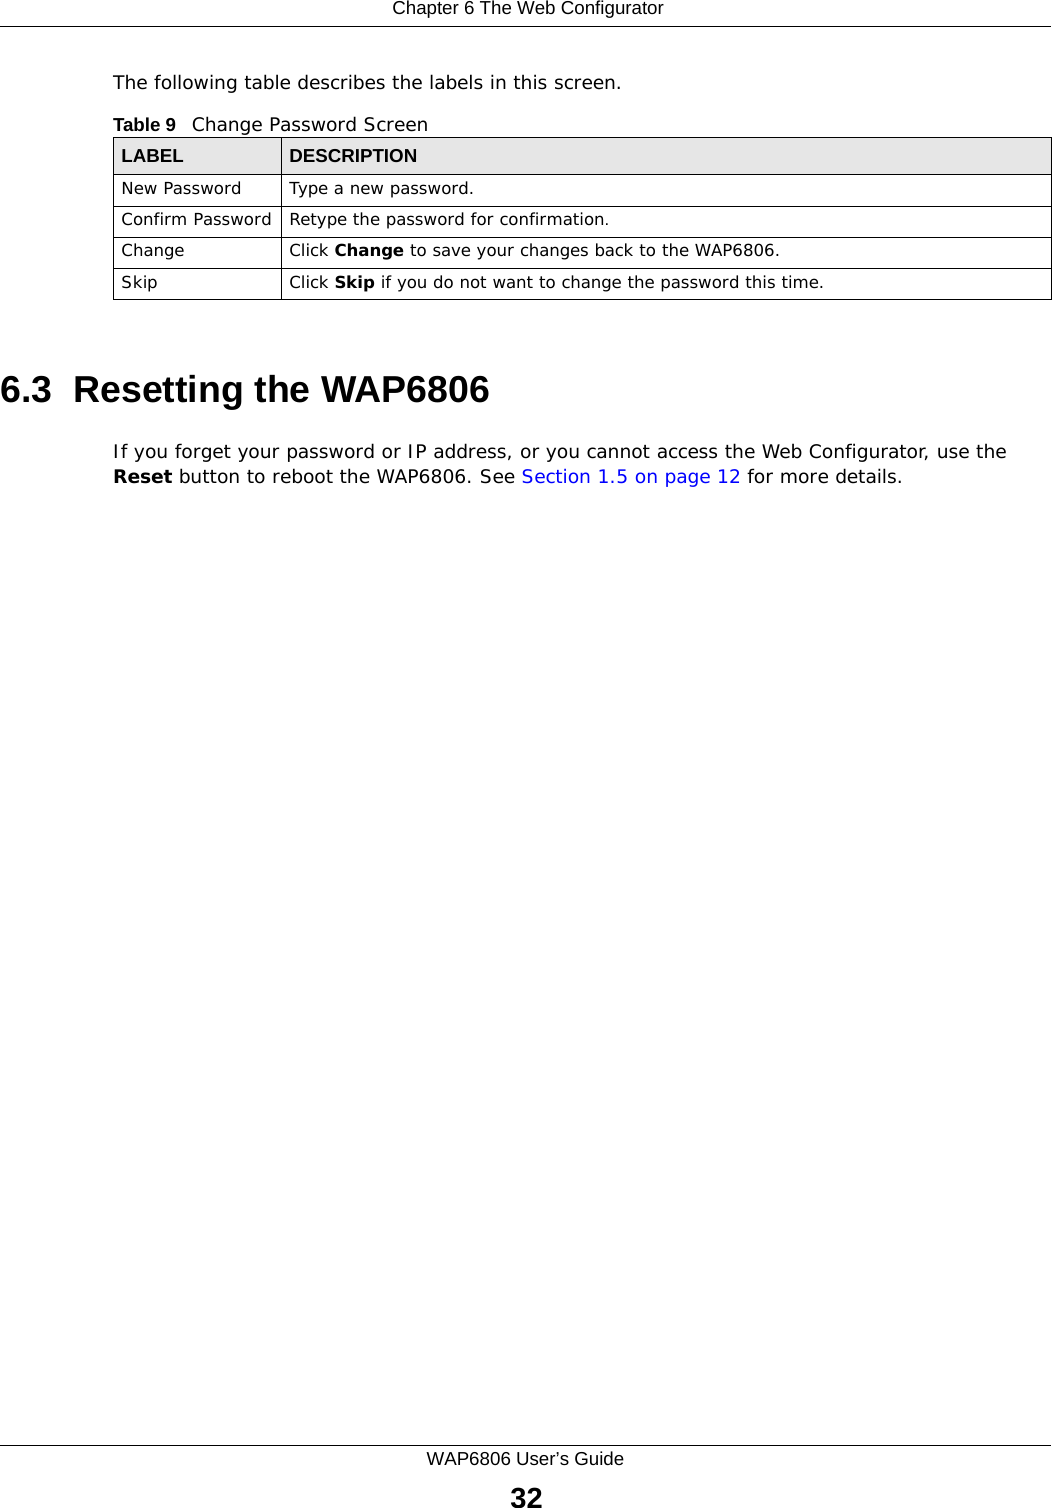  Chapter 6 The Web ConfiguratorWAP6806 User’s Guide32The following table describes the labels in this screen.6.3  Resetting the WAP6806If you forget your password or IP address, or you cannot access the Web Configurator, use the Reset button to reboot the WAP6806. See Section 1.5 on page 12 for more details.Table 9   Change Password ScreenLABEL DESCRIPTIONNew Password Type a new password. Confirm Password Retype the password for confirmation.Change Click Change to save your changes back to the WAP6806.Skip Click Skip if you do not want to change the password this time.